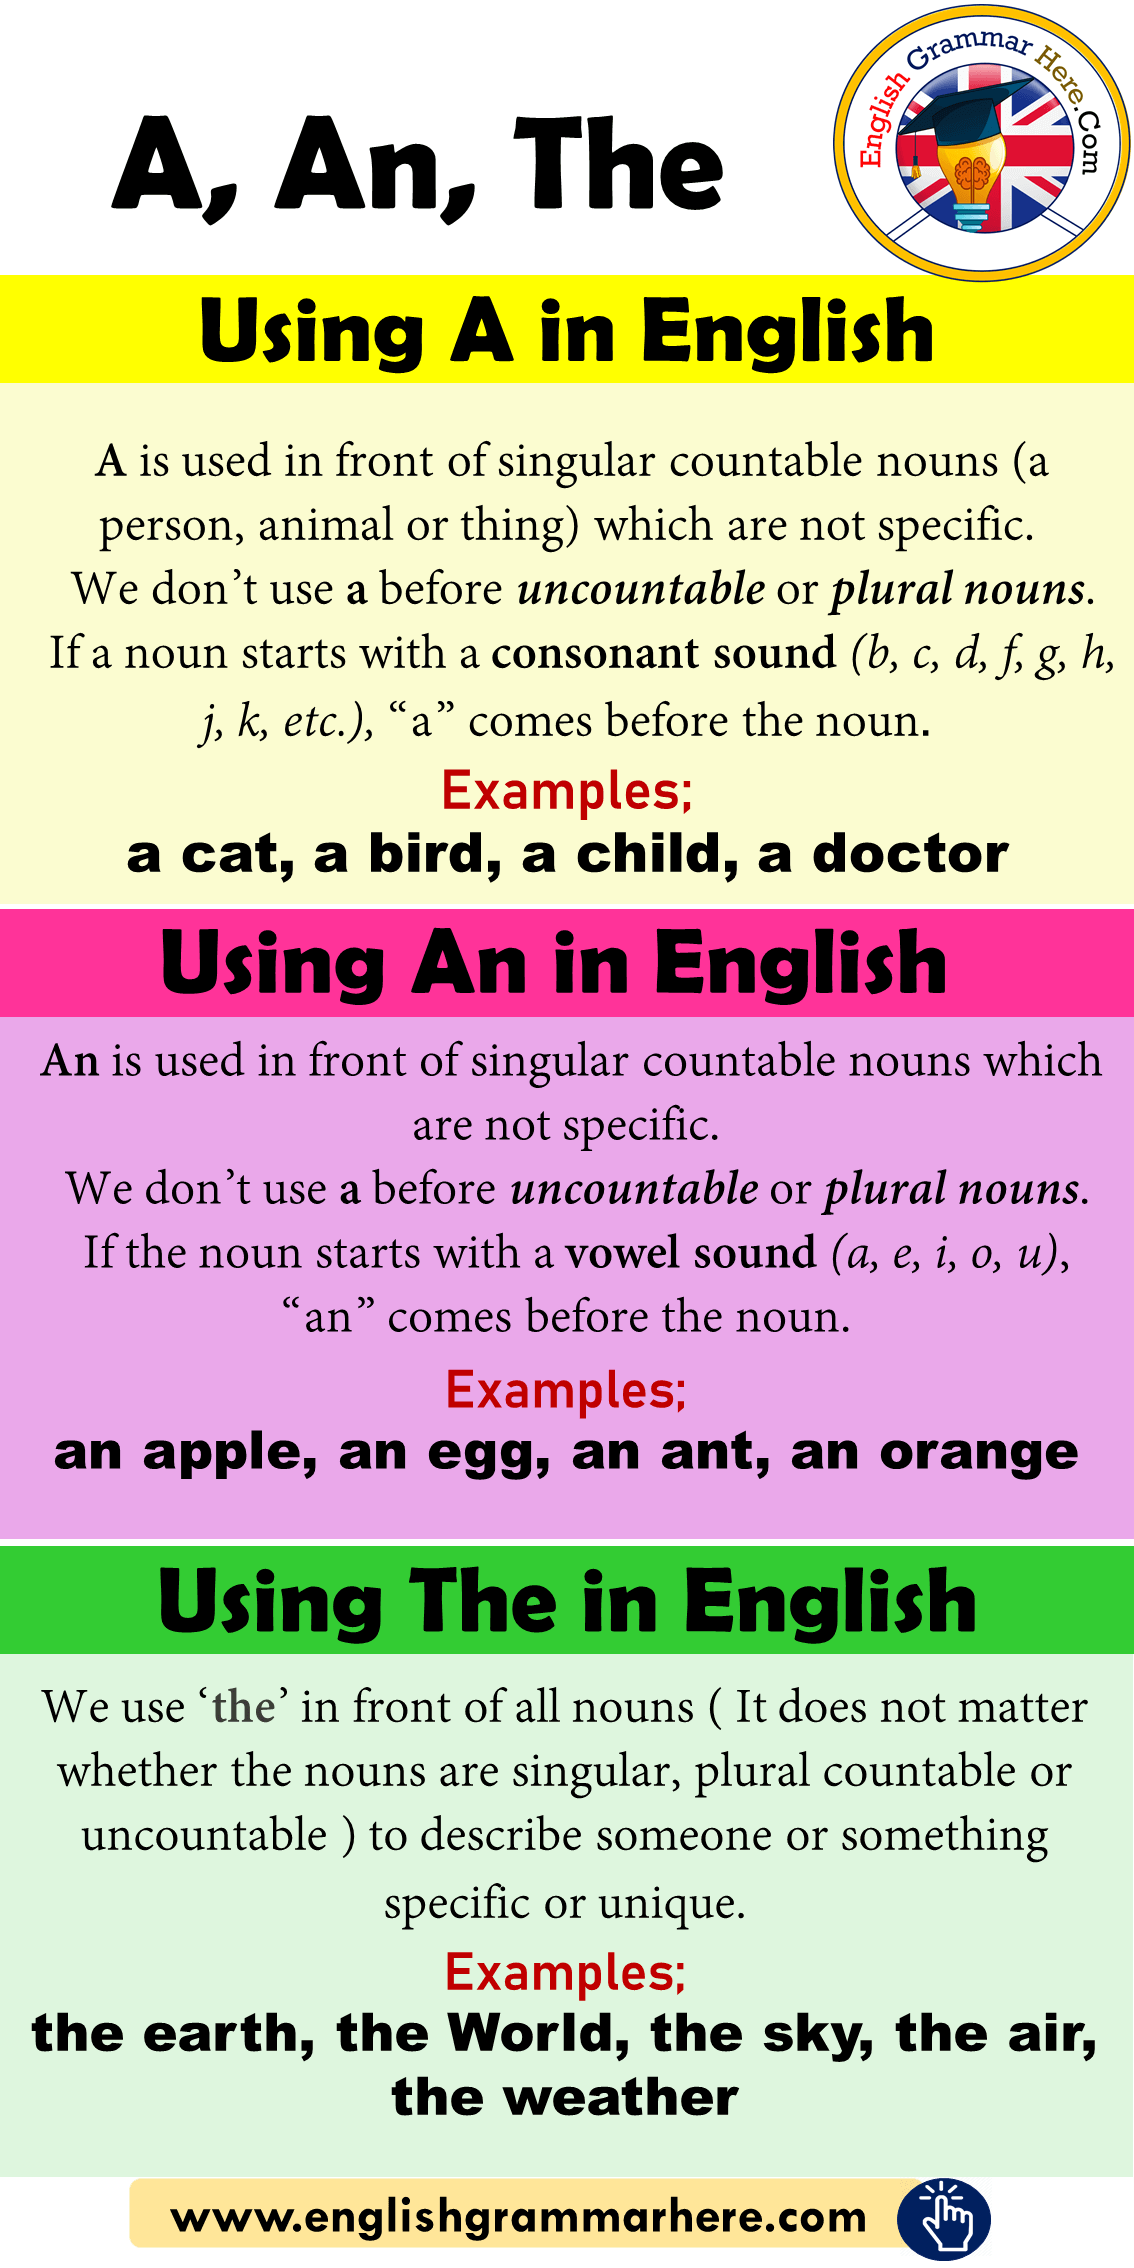 How to use A, An, The in English, Examples